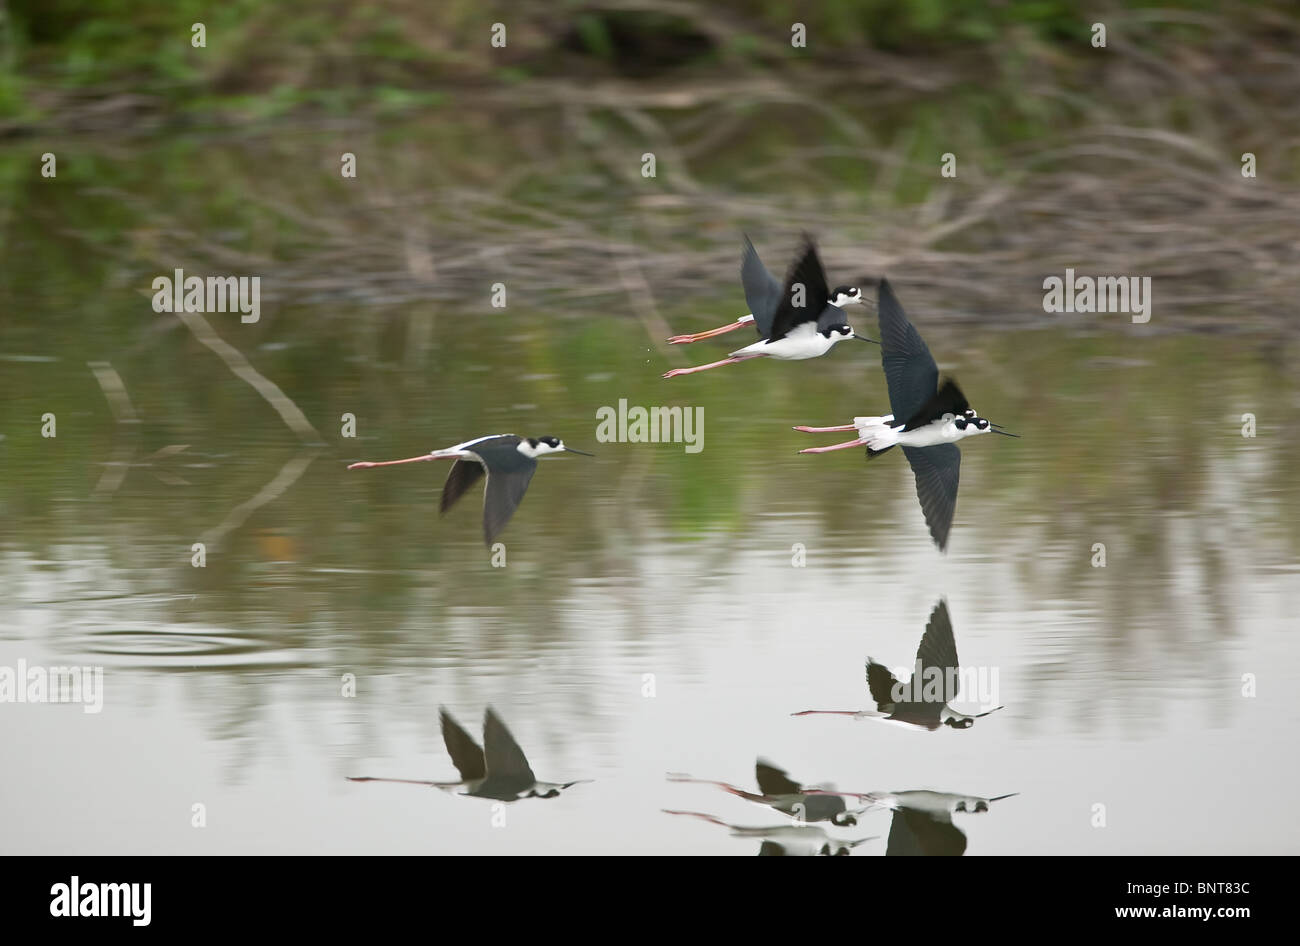 Black-necked stilts, Himantopus mexicanus, flying above a pond near Aguadulce, Cocle province, Republic of Panama. Stock Photo